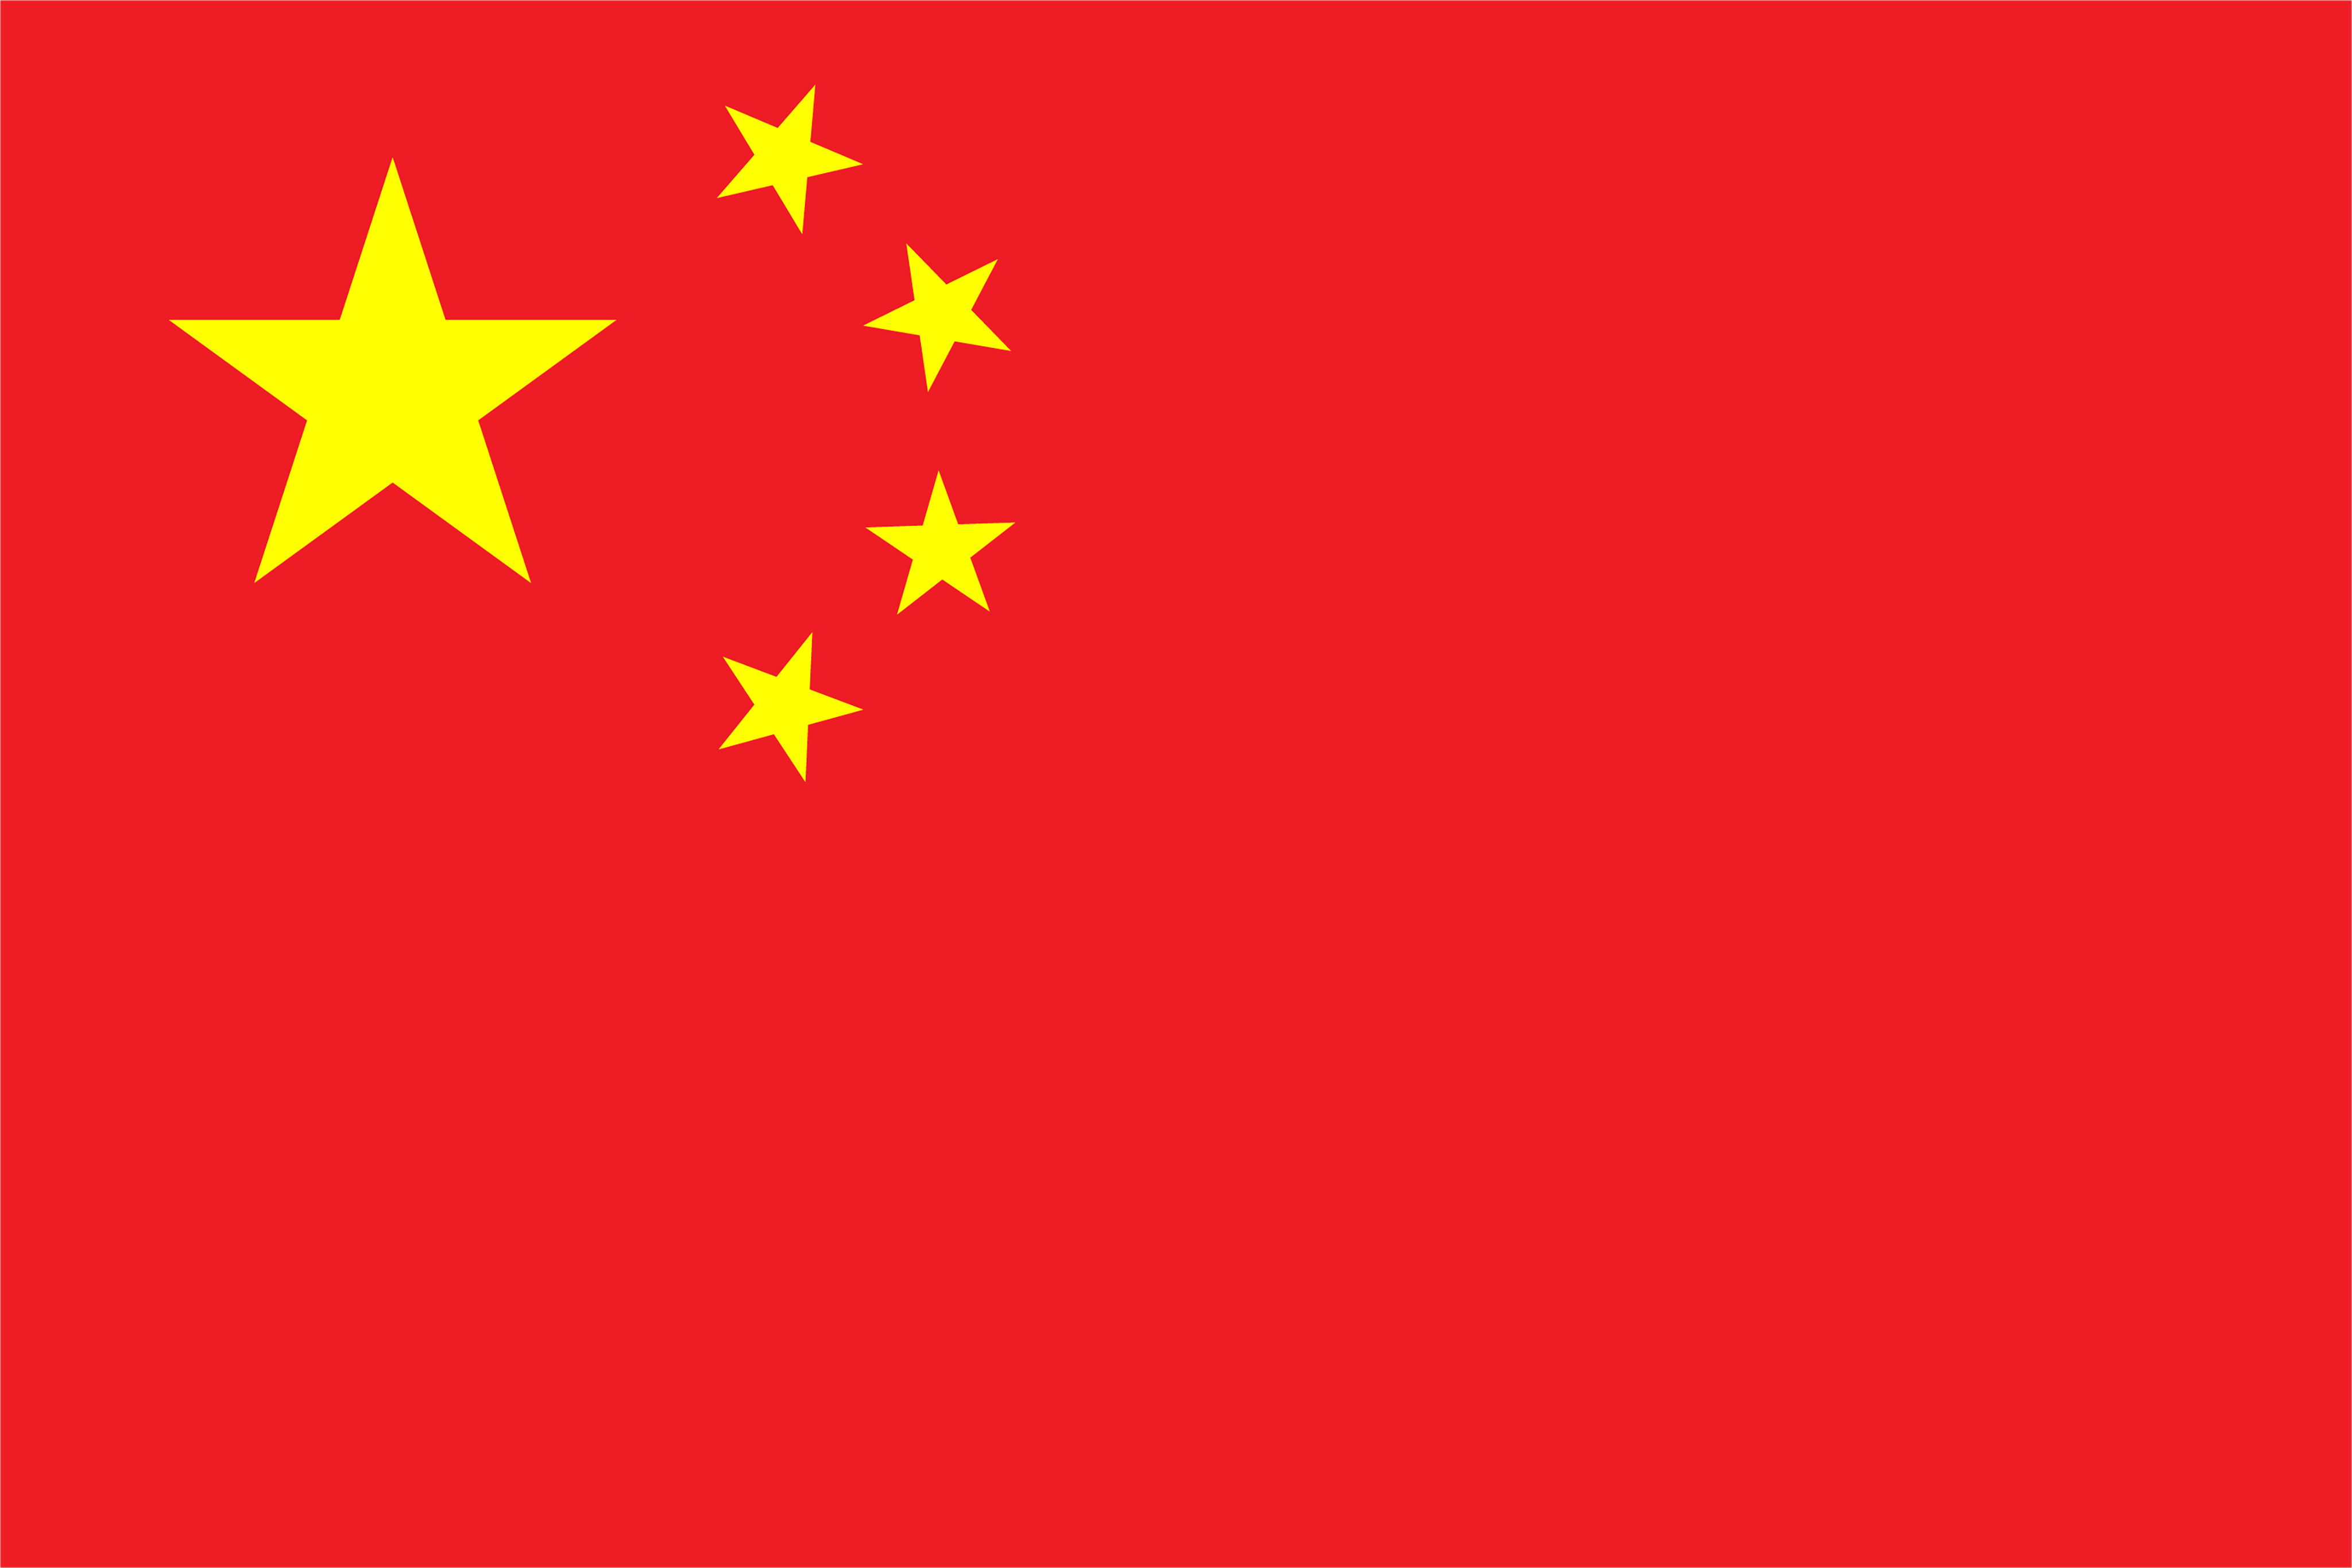 The upcoming National Day of the People’s Republic of China